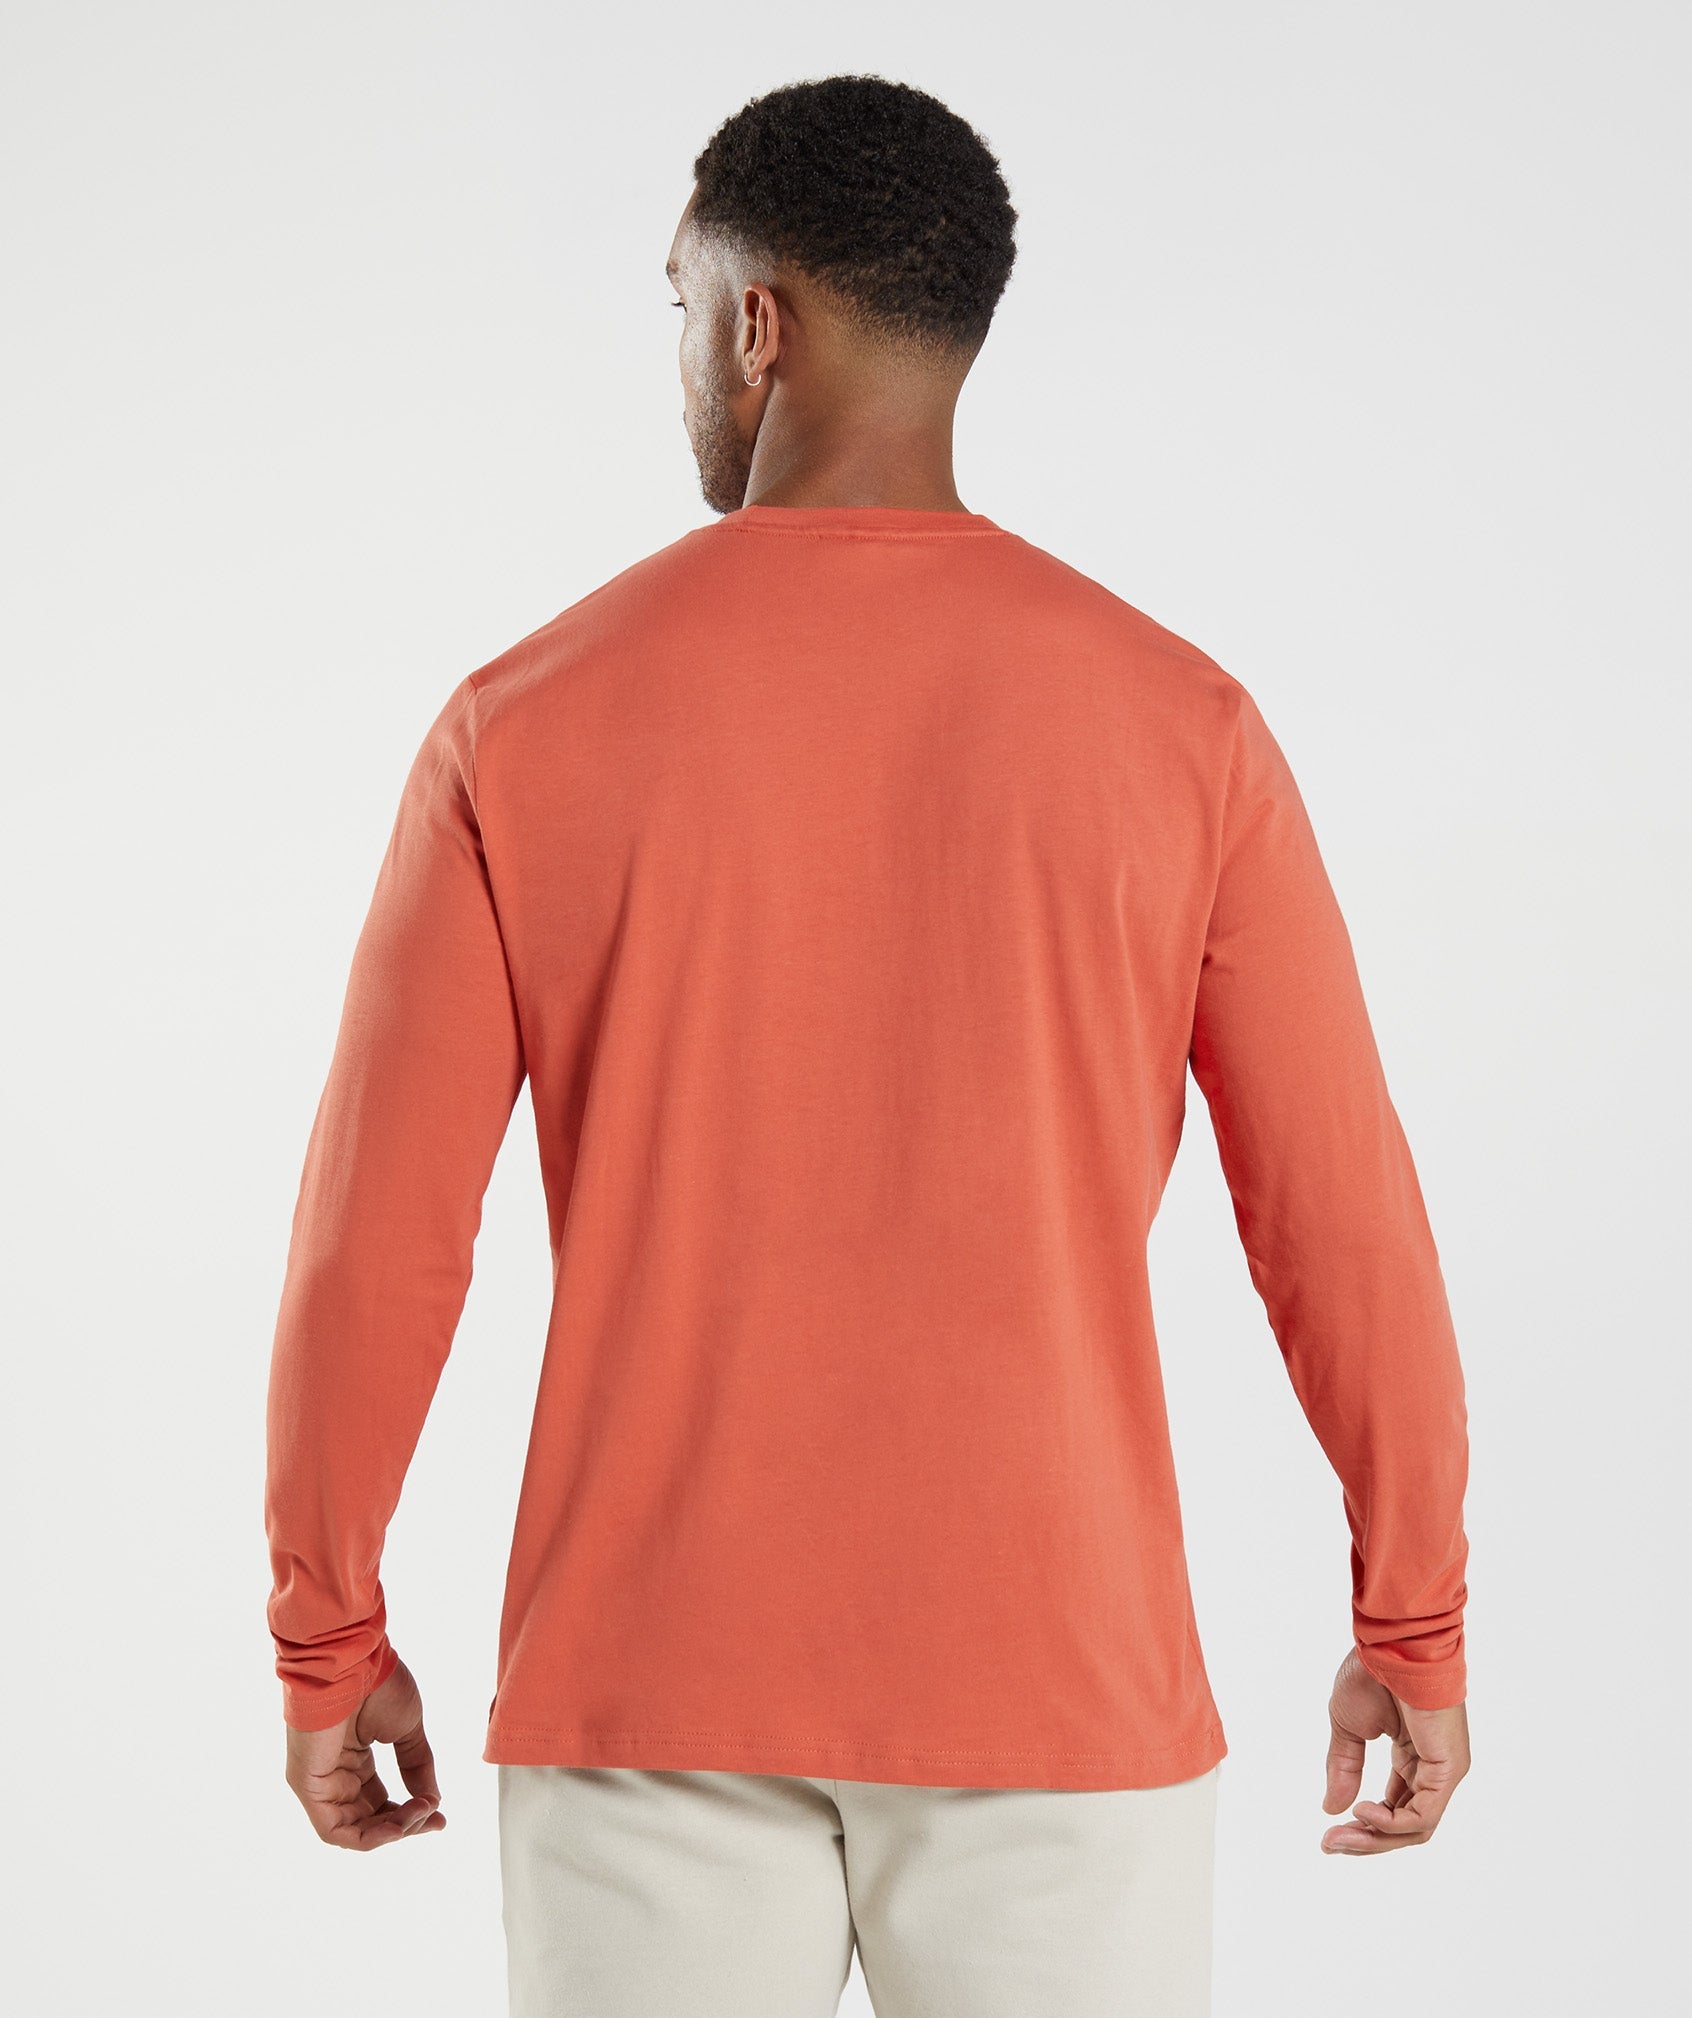 Crest Long Sleeve T-Shirt in Storm Red - view 2